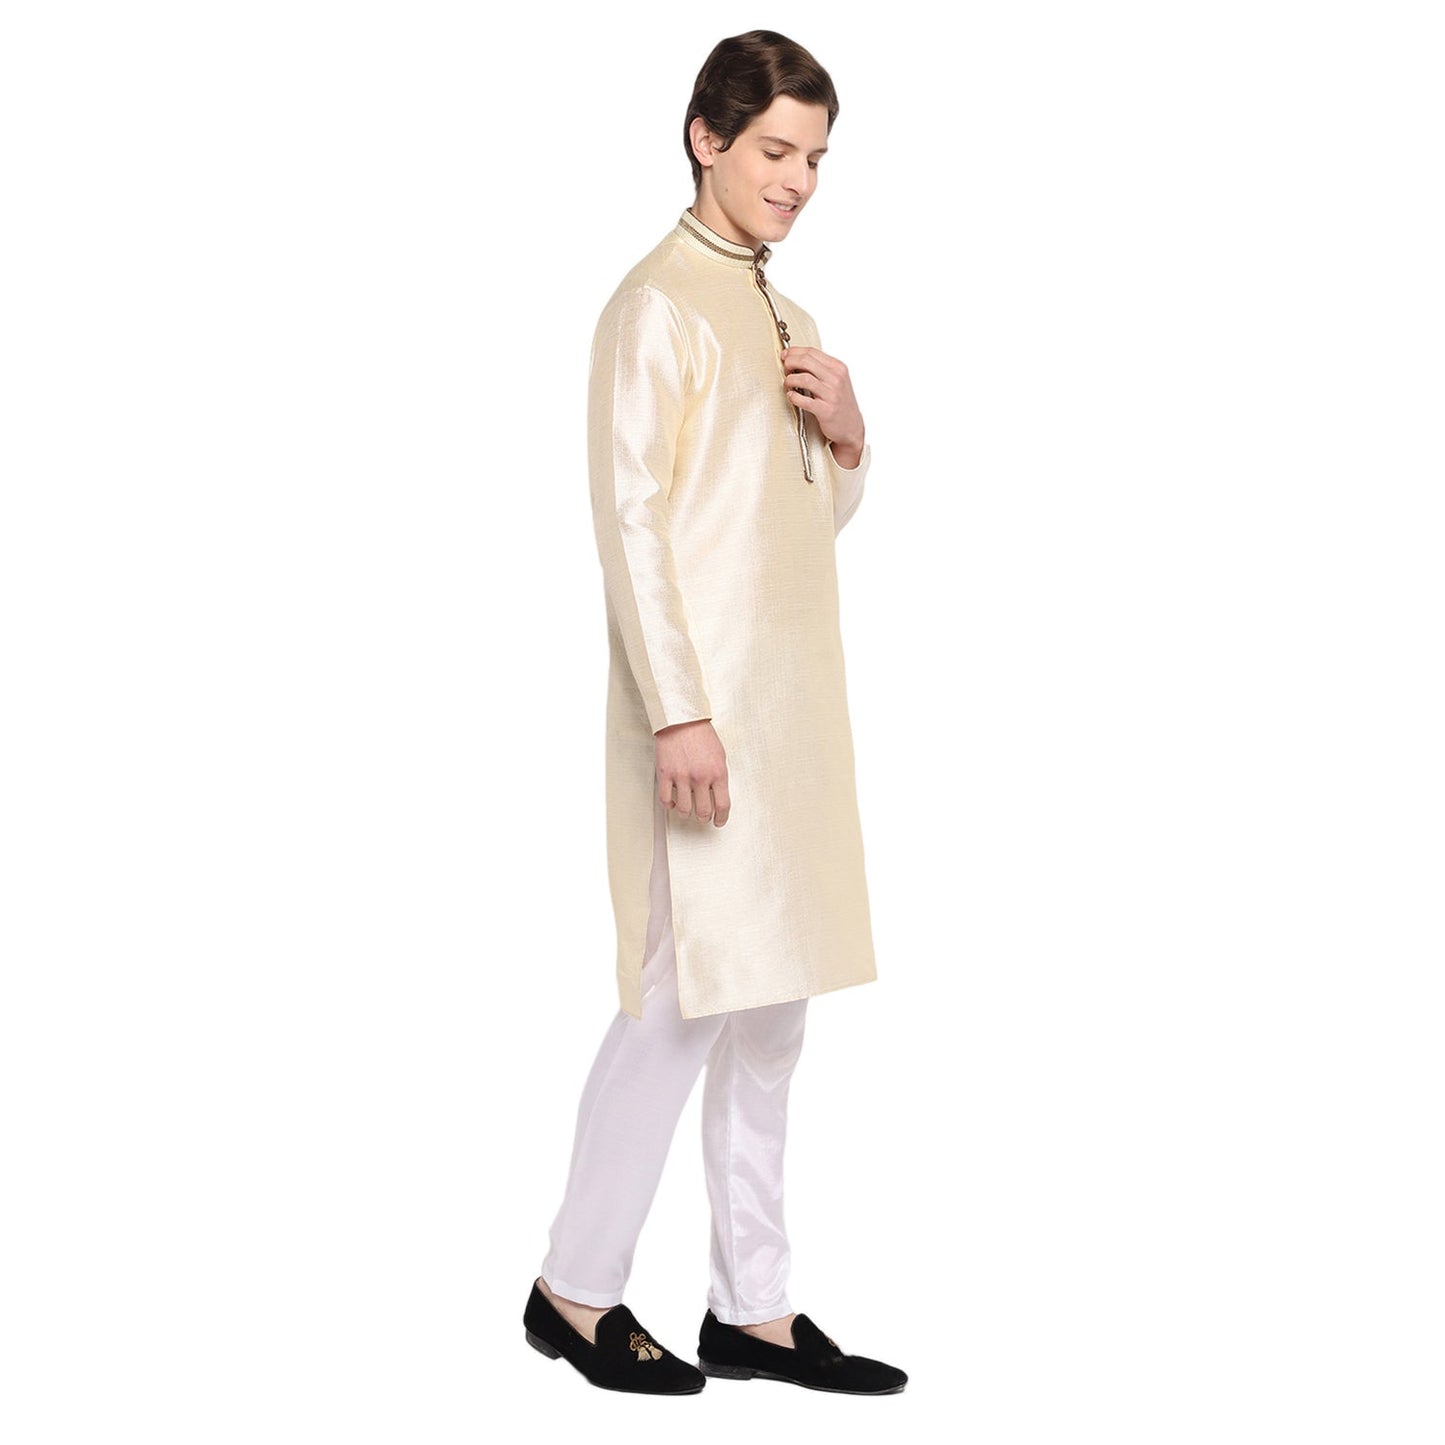 Off White Straight Embroidered With Loop Button Silk Blend Men's Kurta